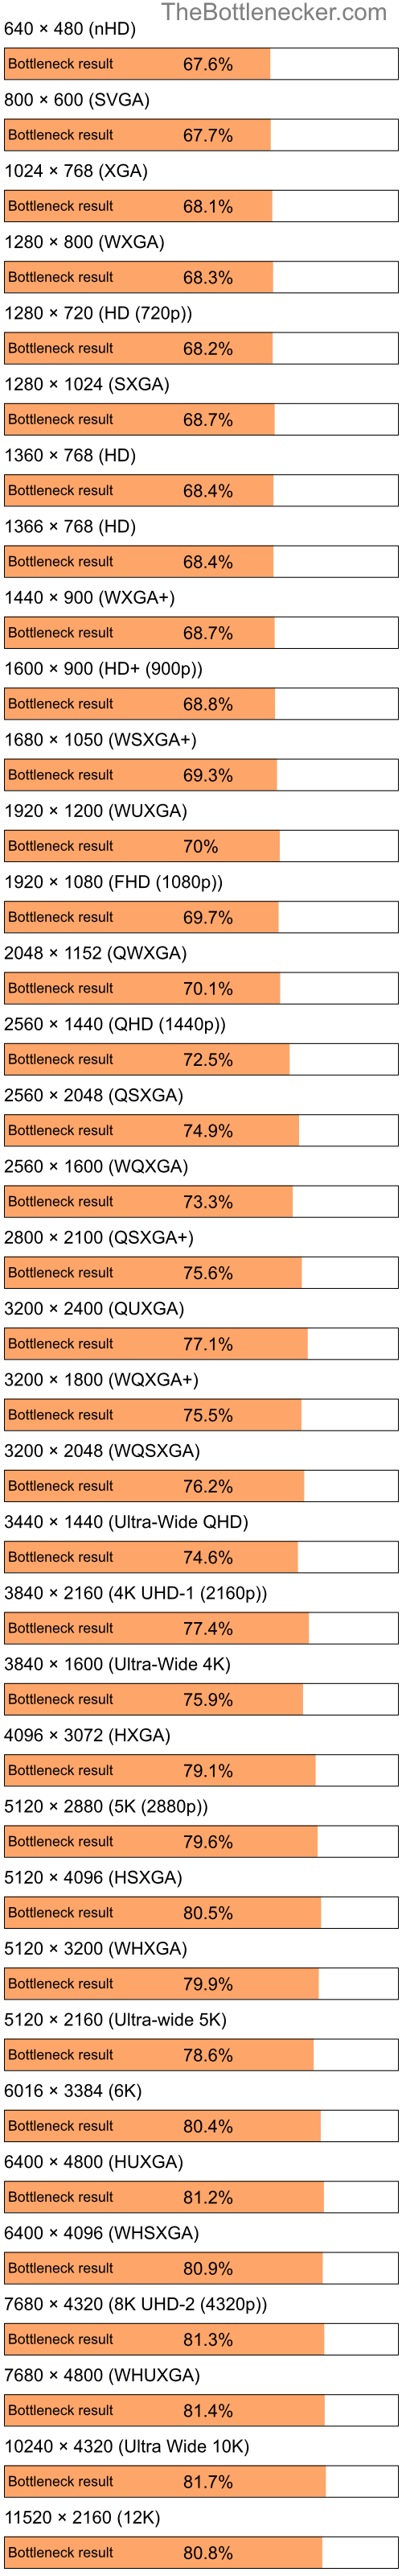 Bottleneck results by resolution for Intel Pentium 4 and AMD Mobility Radeon X300 in Processor Intense Tasks